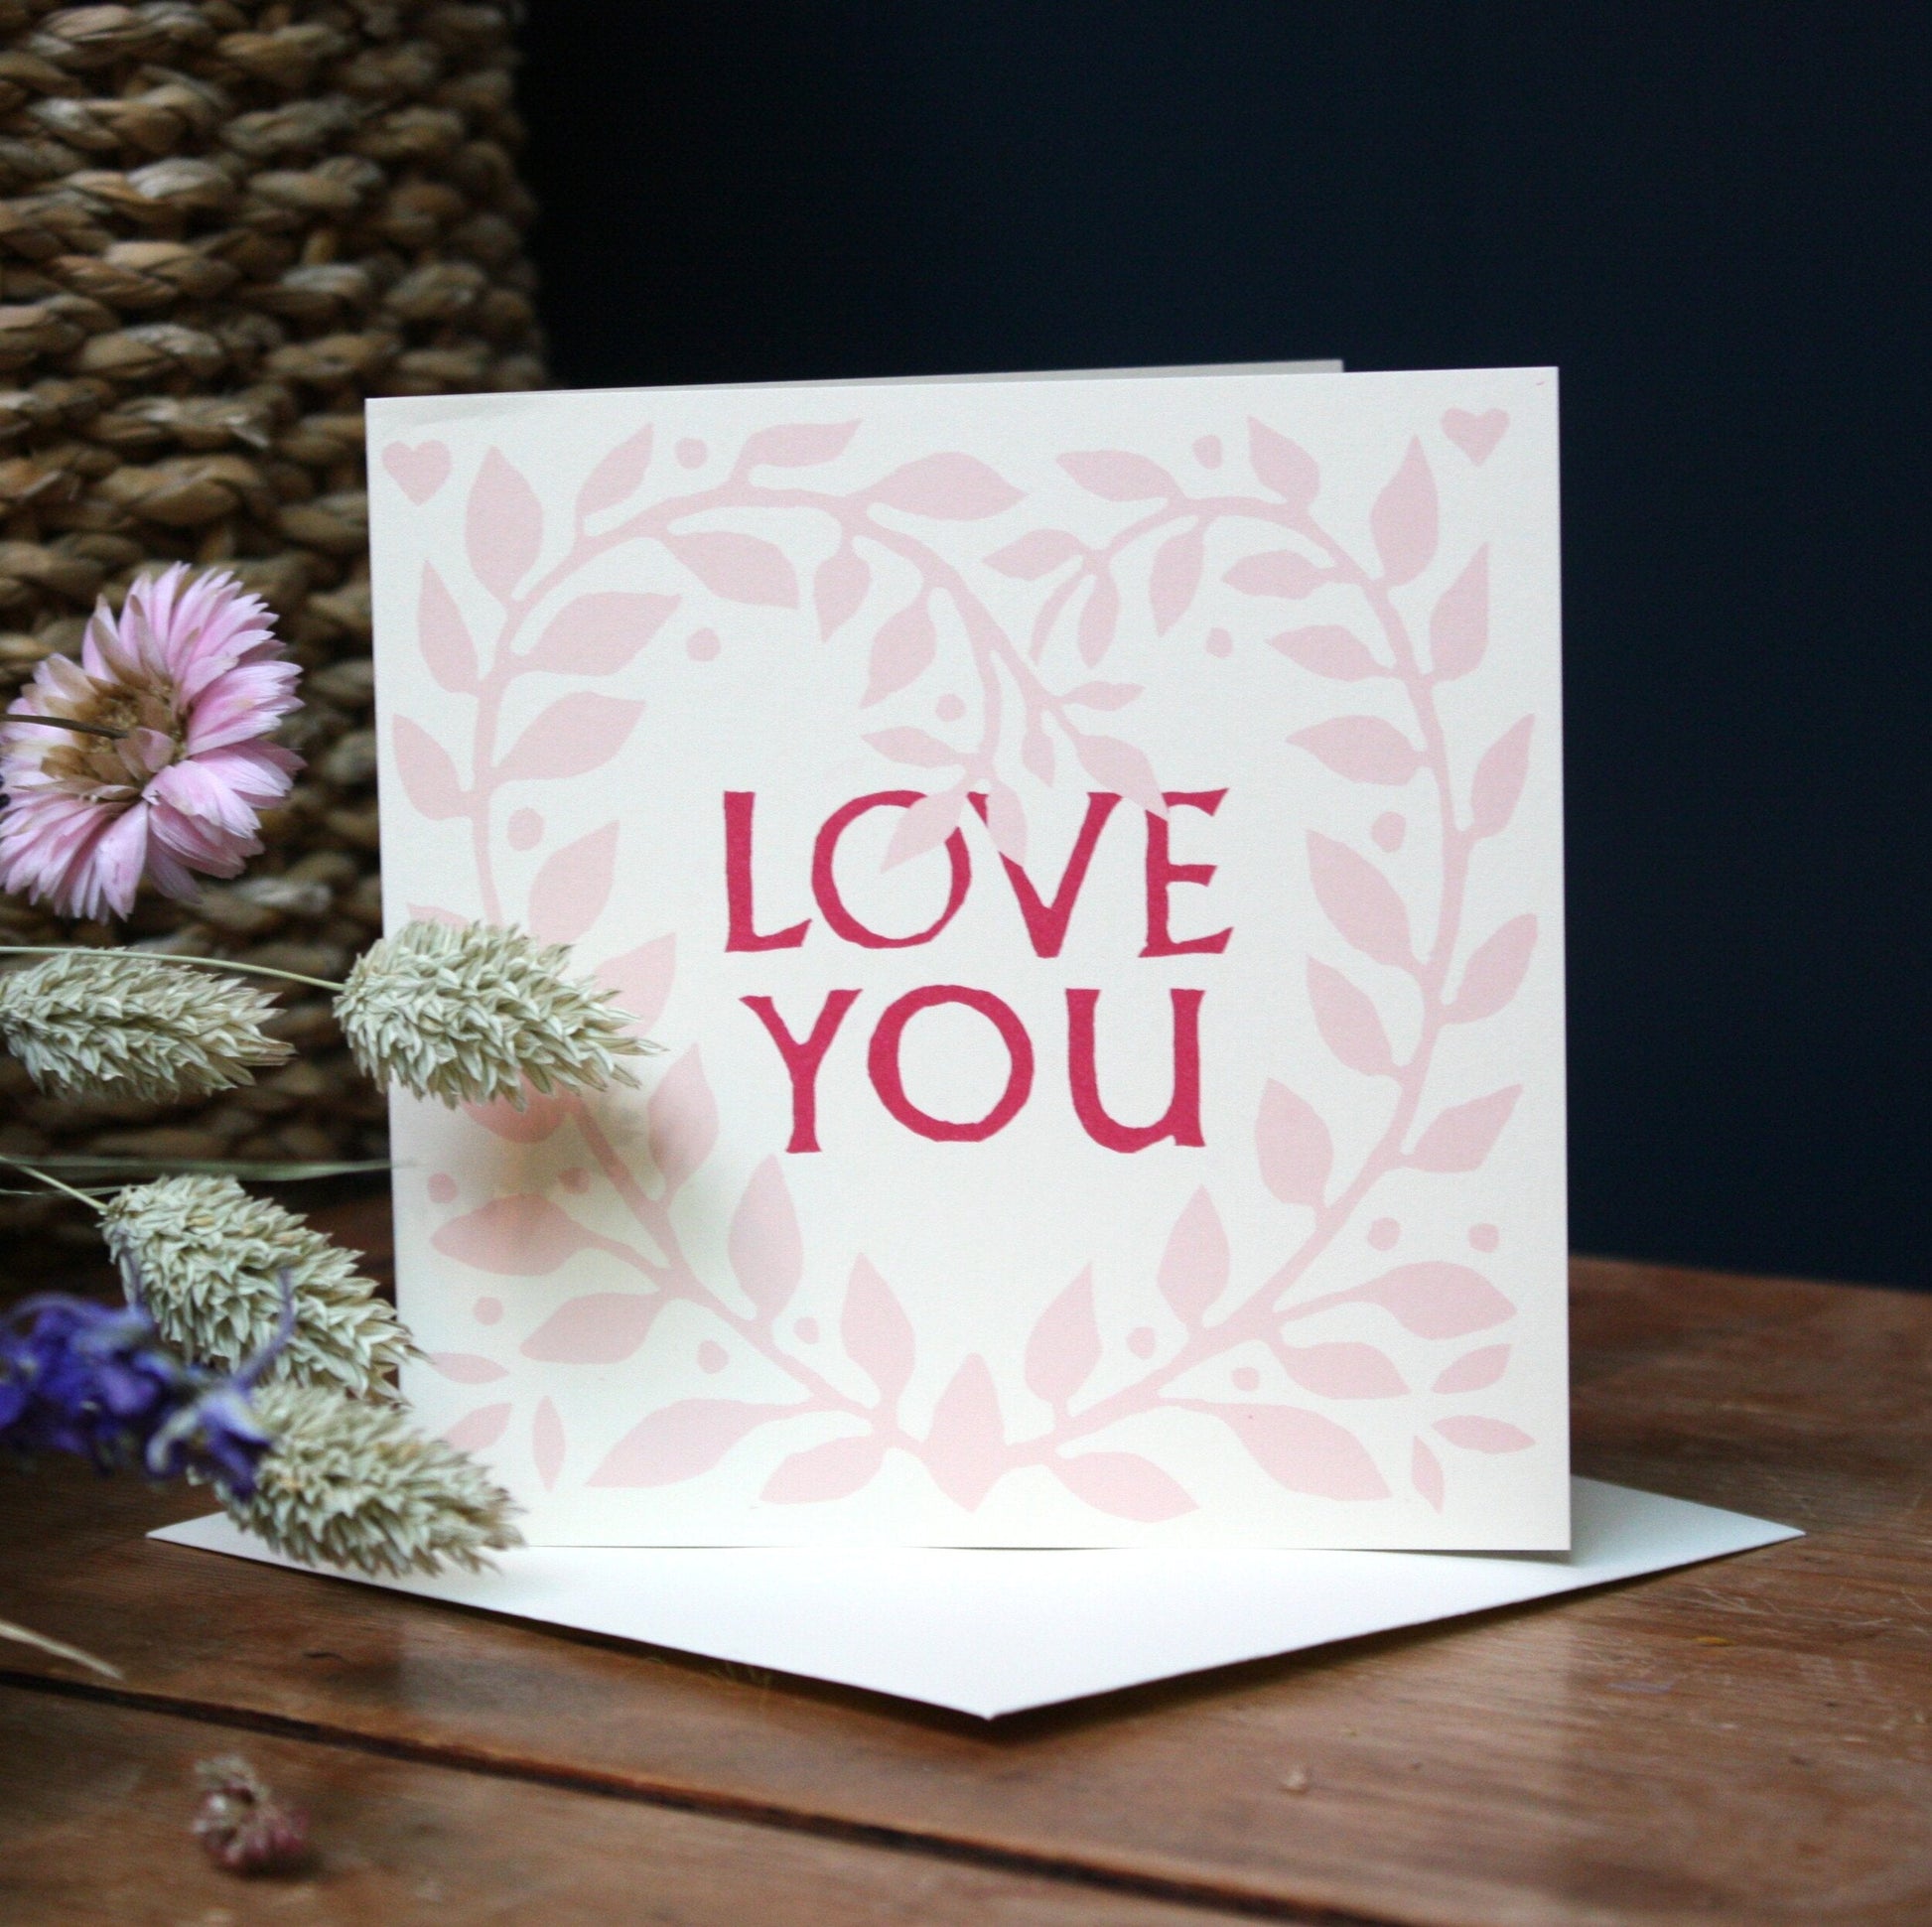 'Love You' card - The Bristol Artisan Handmade Sustainable Gifts and Homewares.